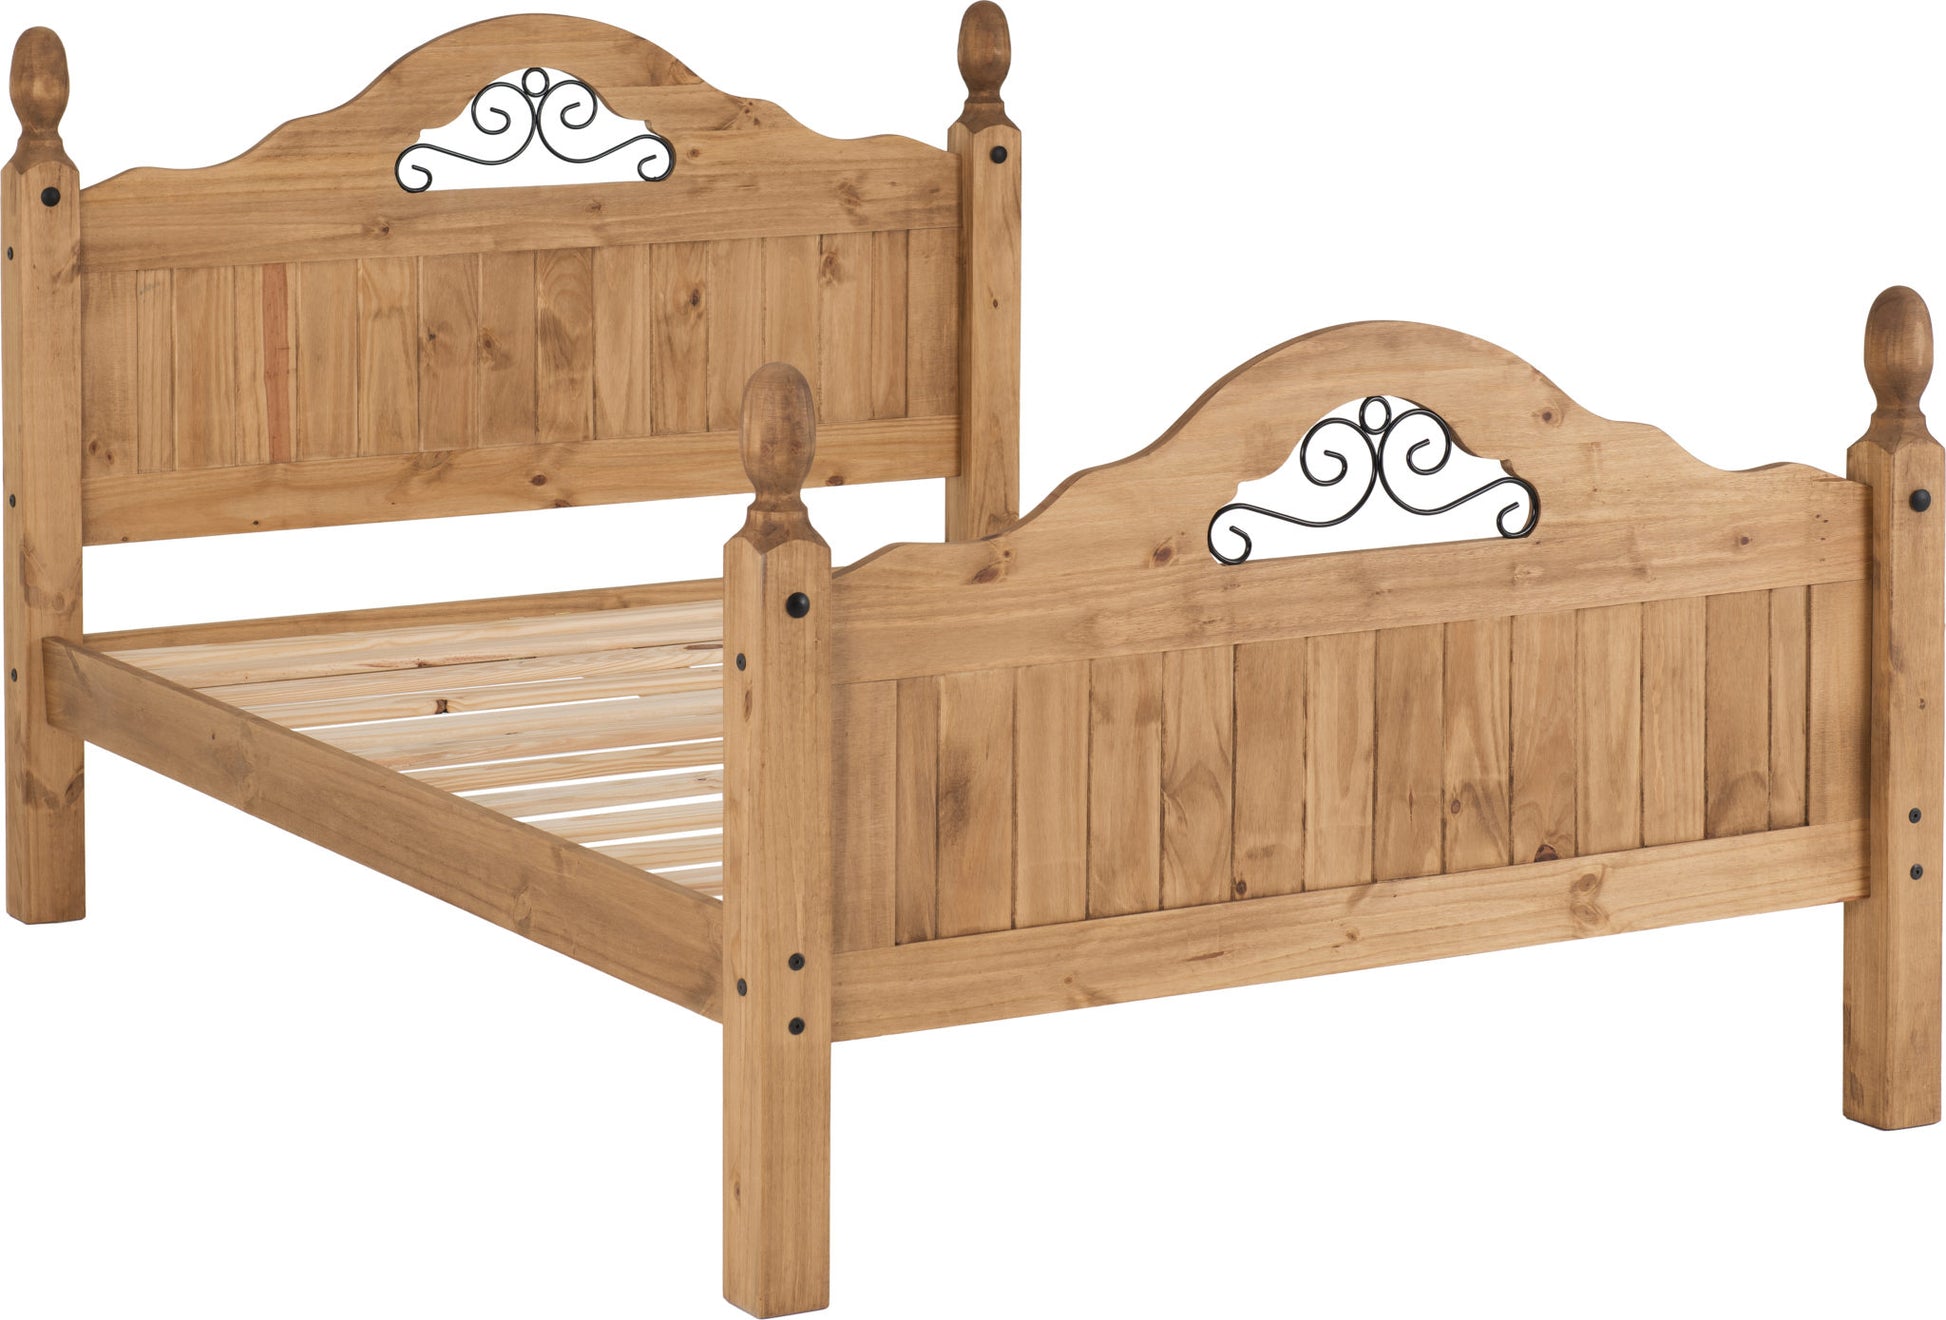 Corona Scroll 4'6"  Double Bed High Foot End- Distressed Waxed Pine